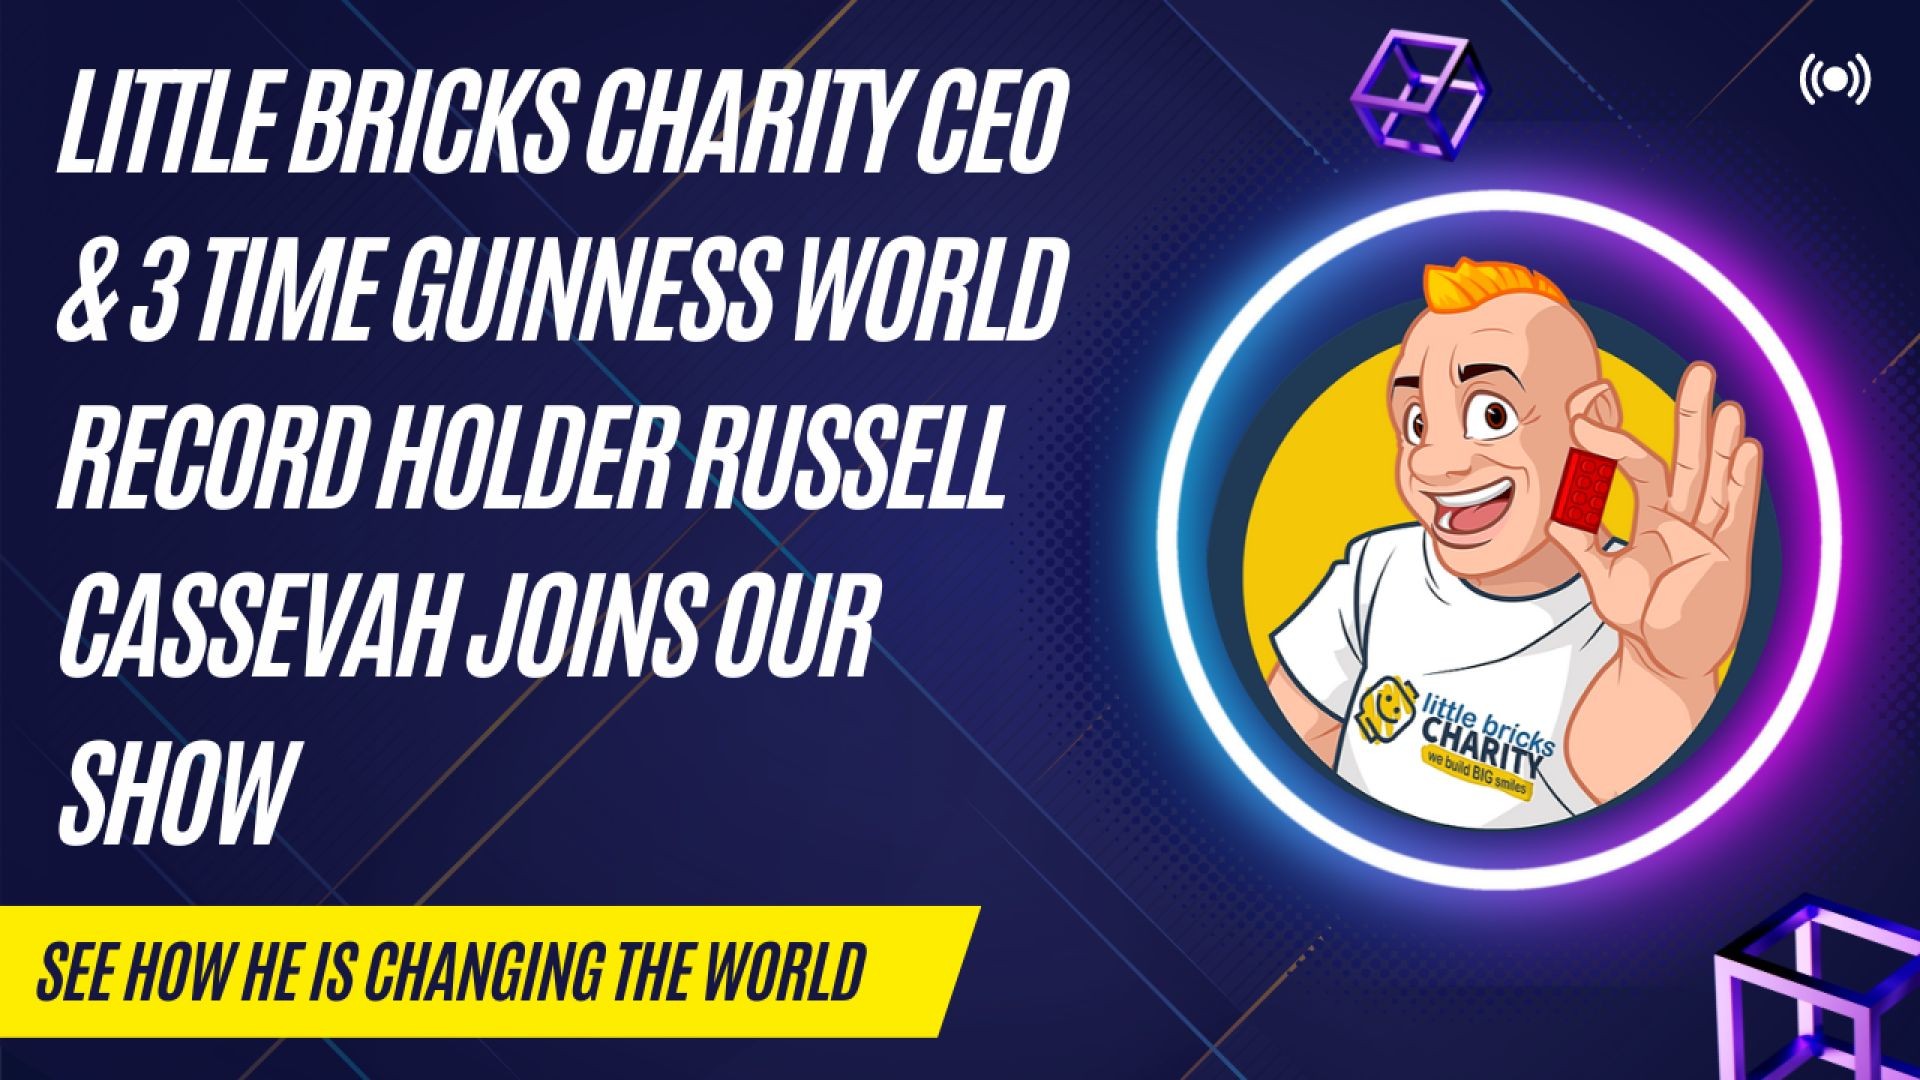 Little Bricks Charity CEO & 3 Time Guinness World Record Holder Russell Cassevah Joins Our Show